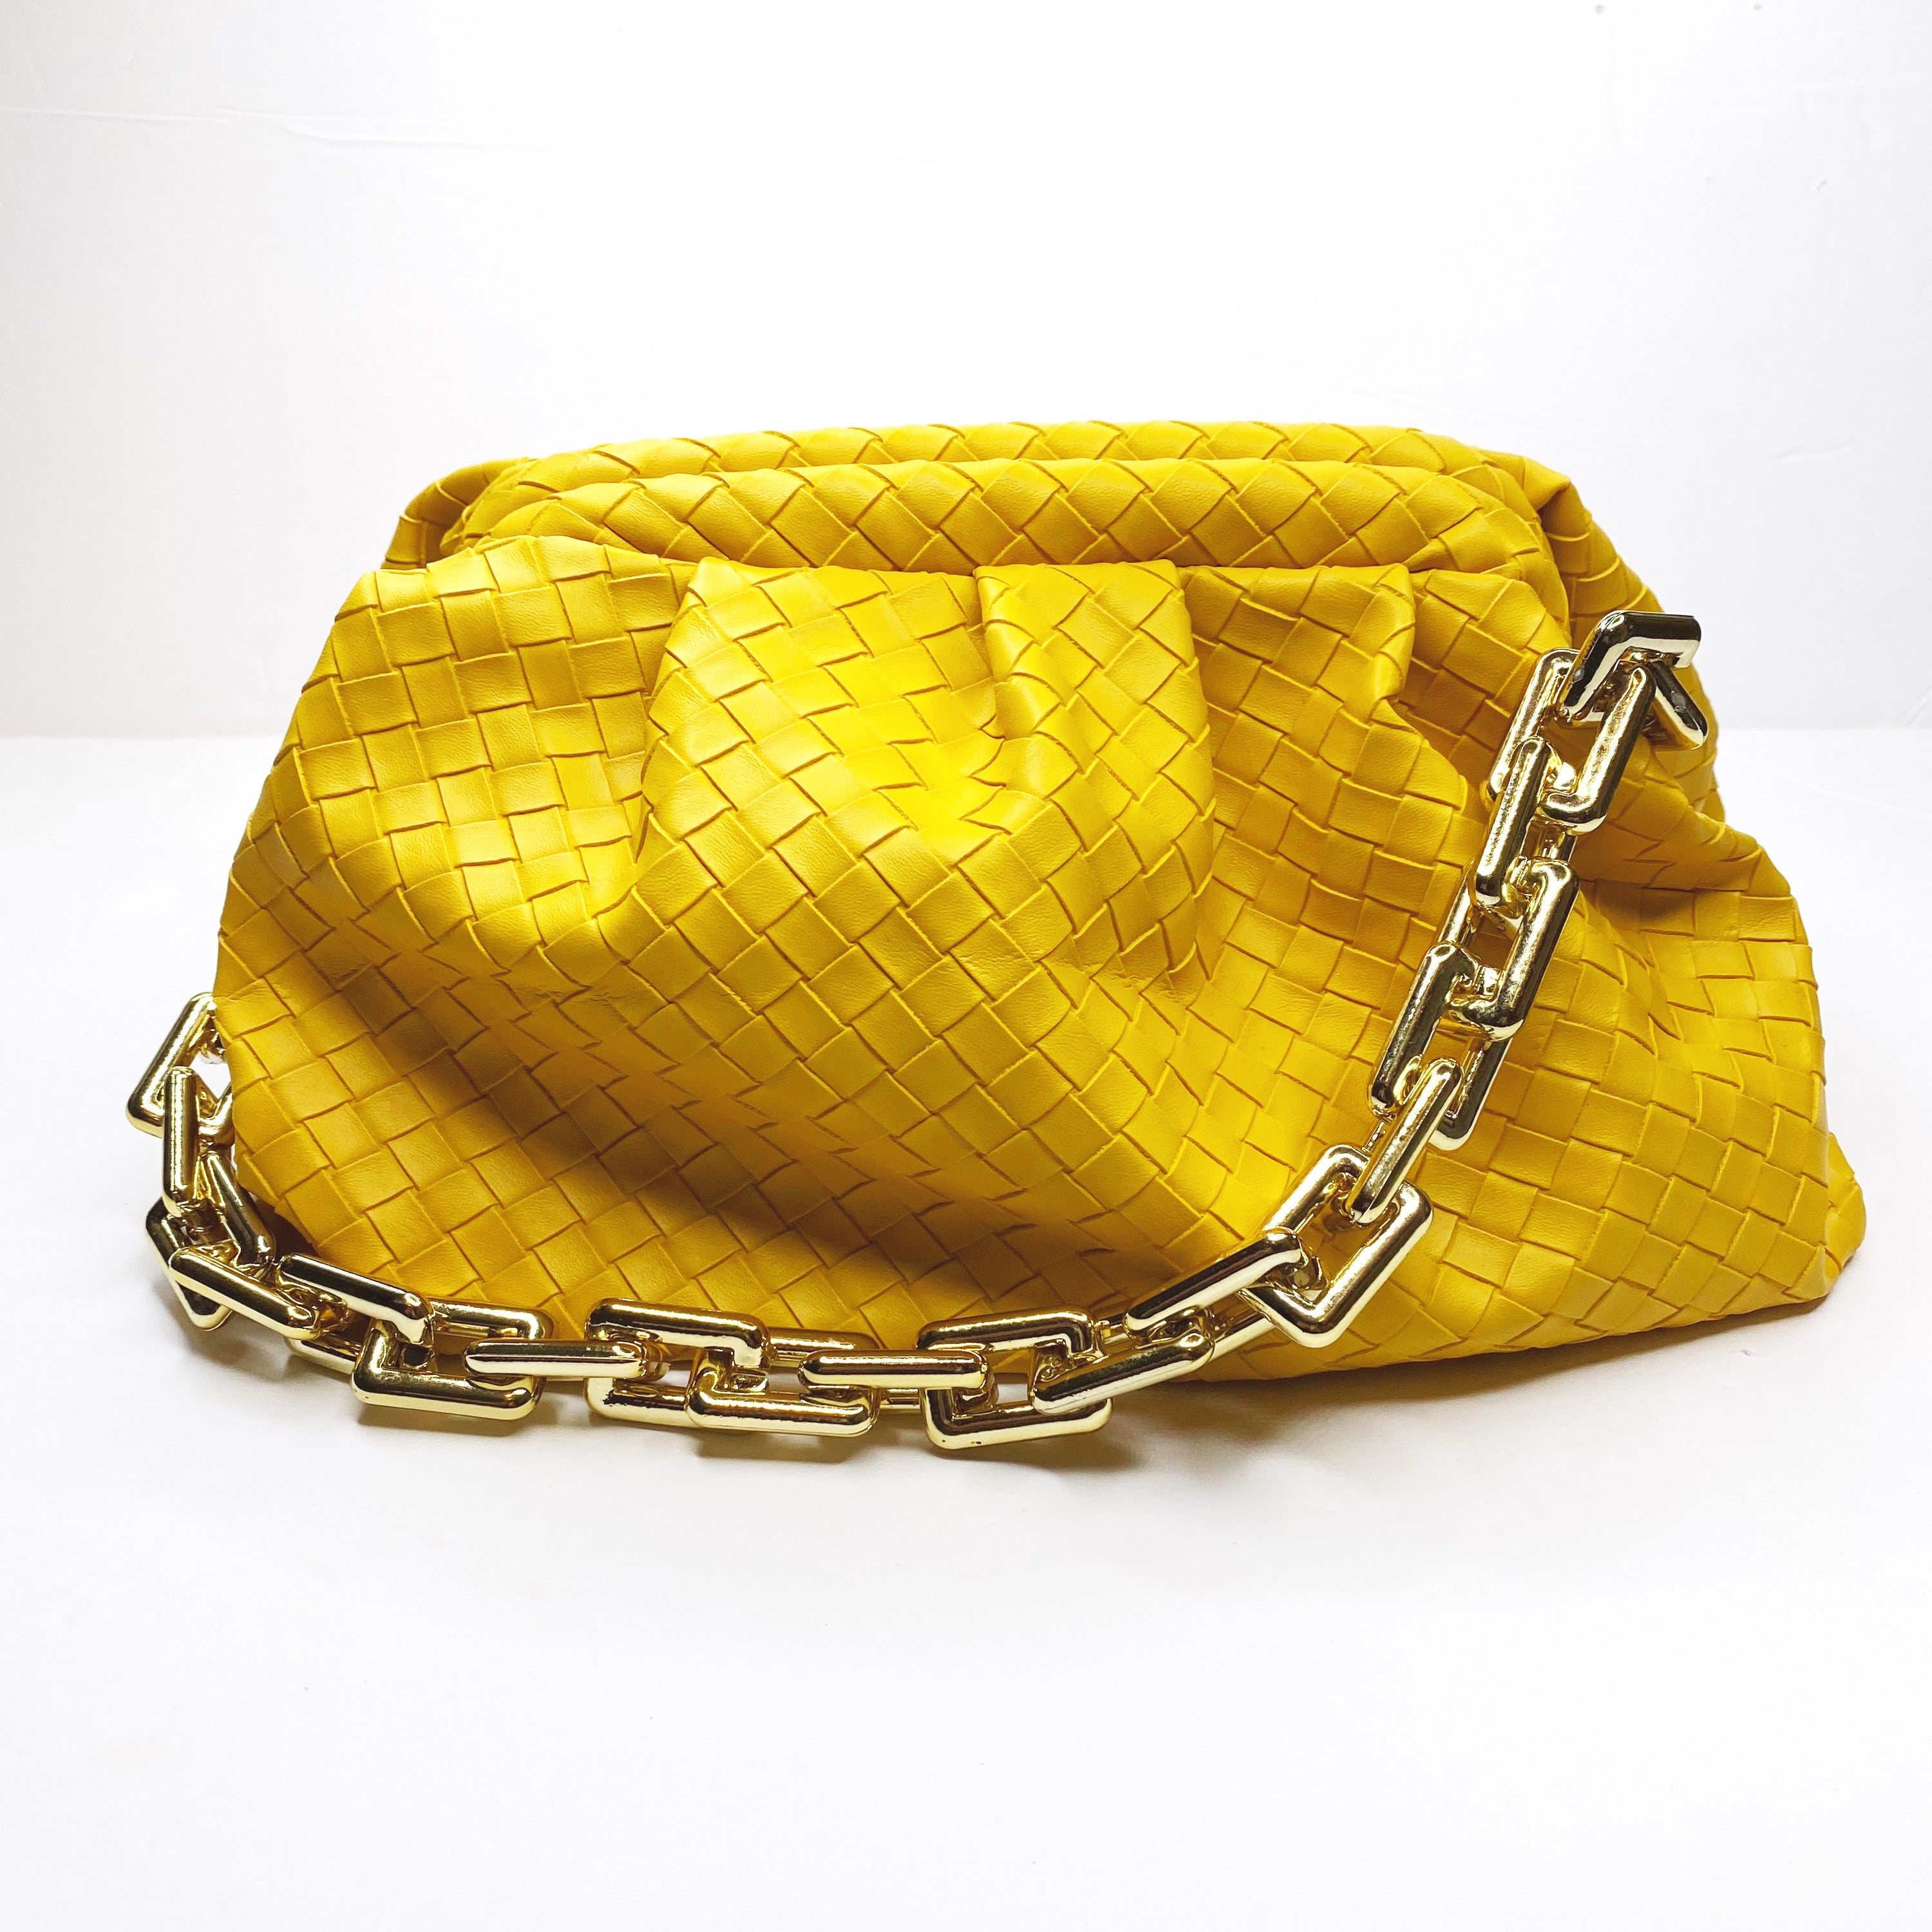 Felicia Weave Amber Leather Pouch Handbag